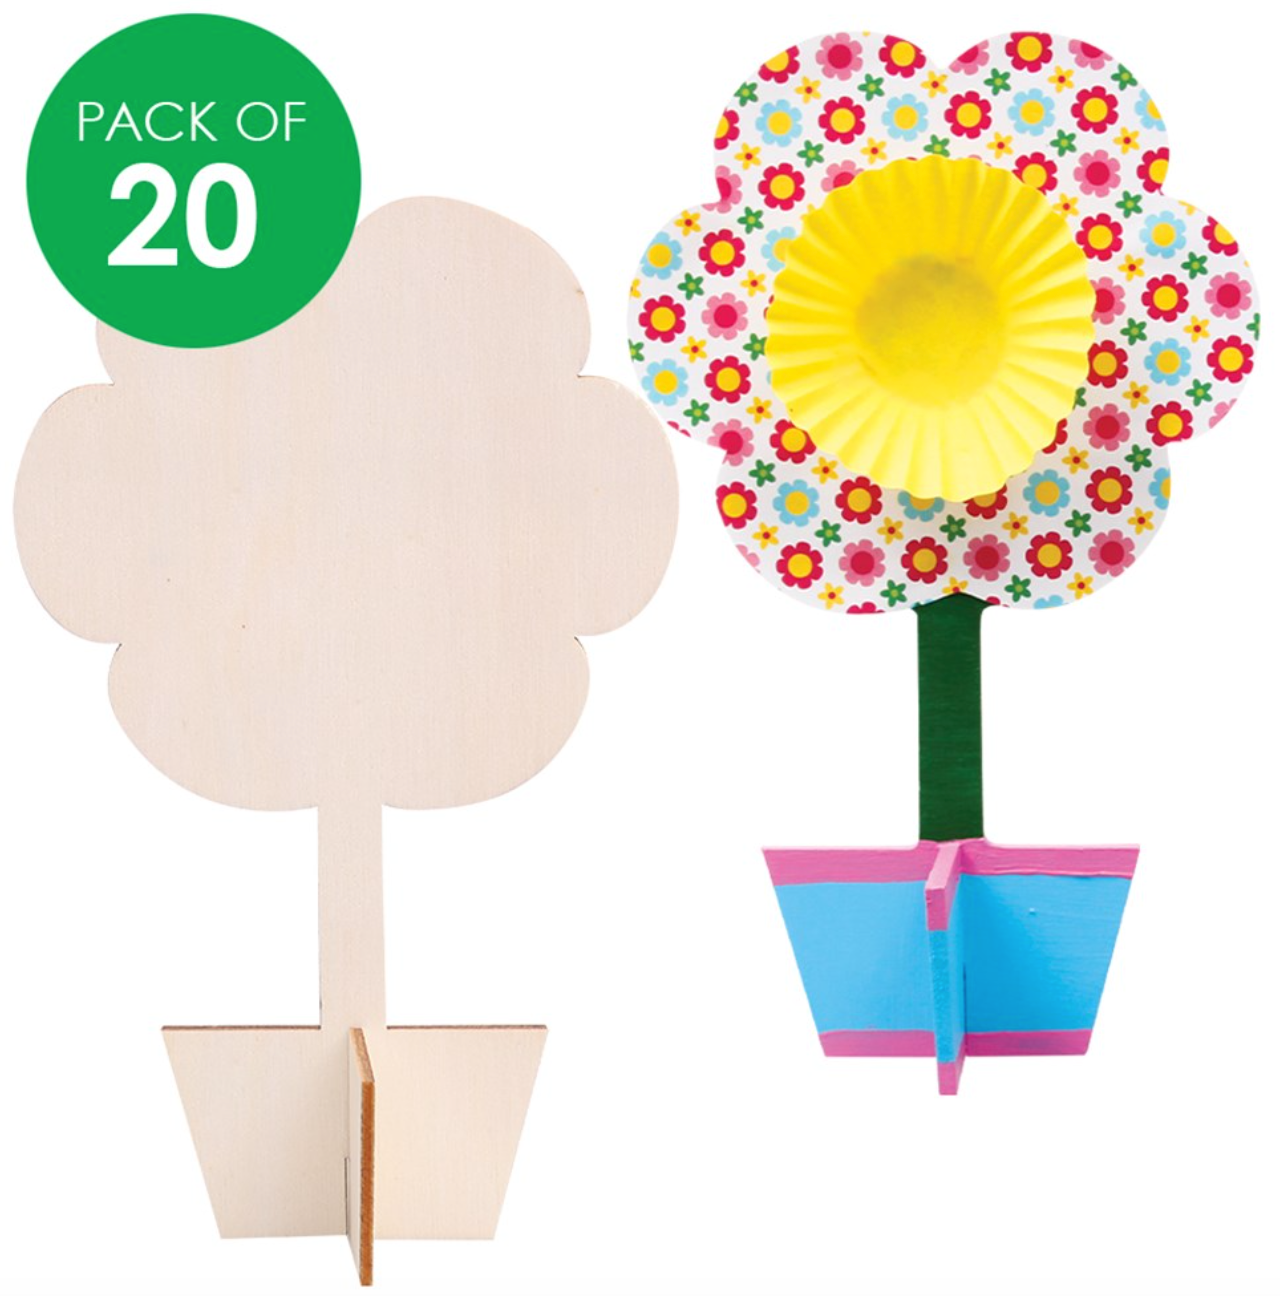 3D Wooden Flowers Pack of 20